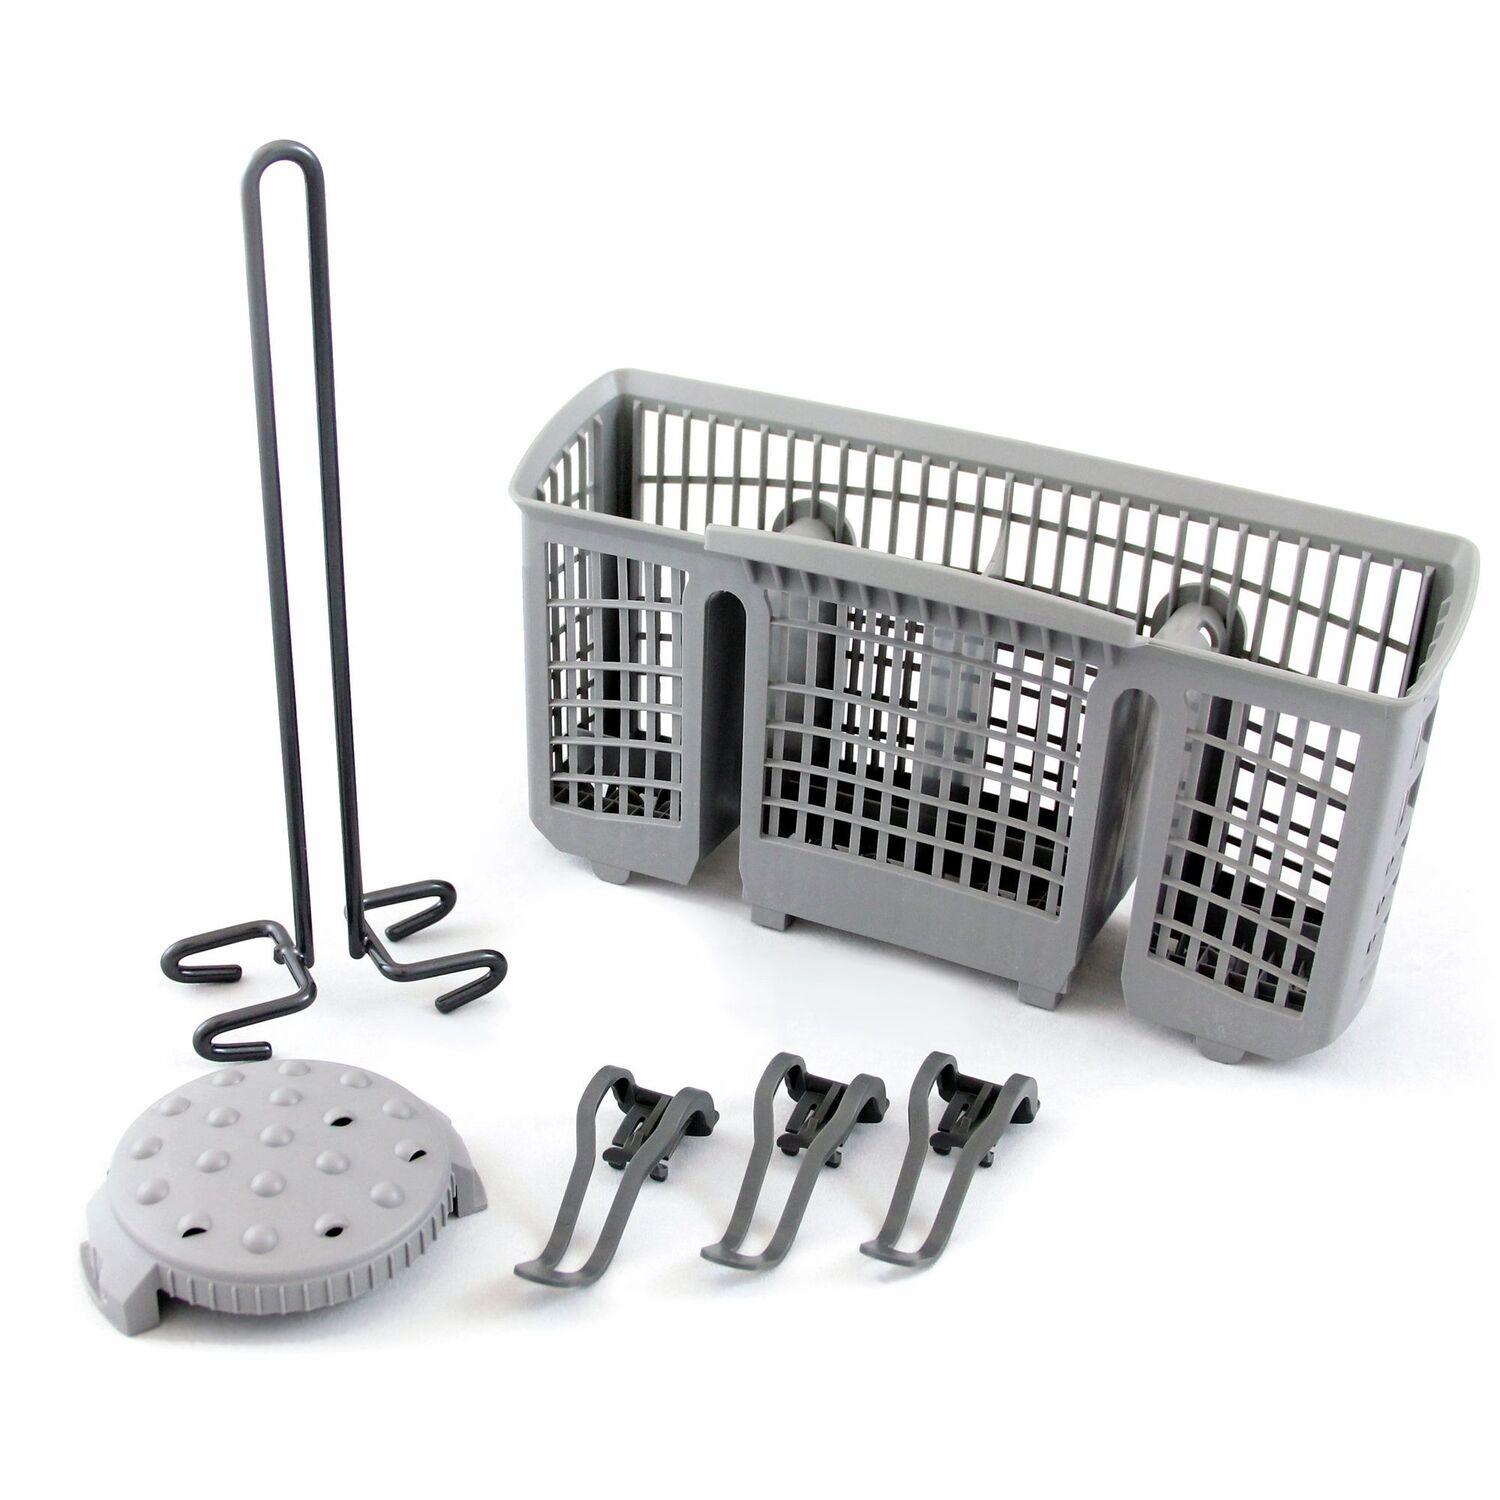 Bosch Dishwasher Accessory Kit with Extra Tall Item Sprinkler, Vase/Bottle Holder, 3 Plastic Item Clips and Small Item Basket - Main Lineup